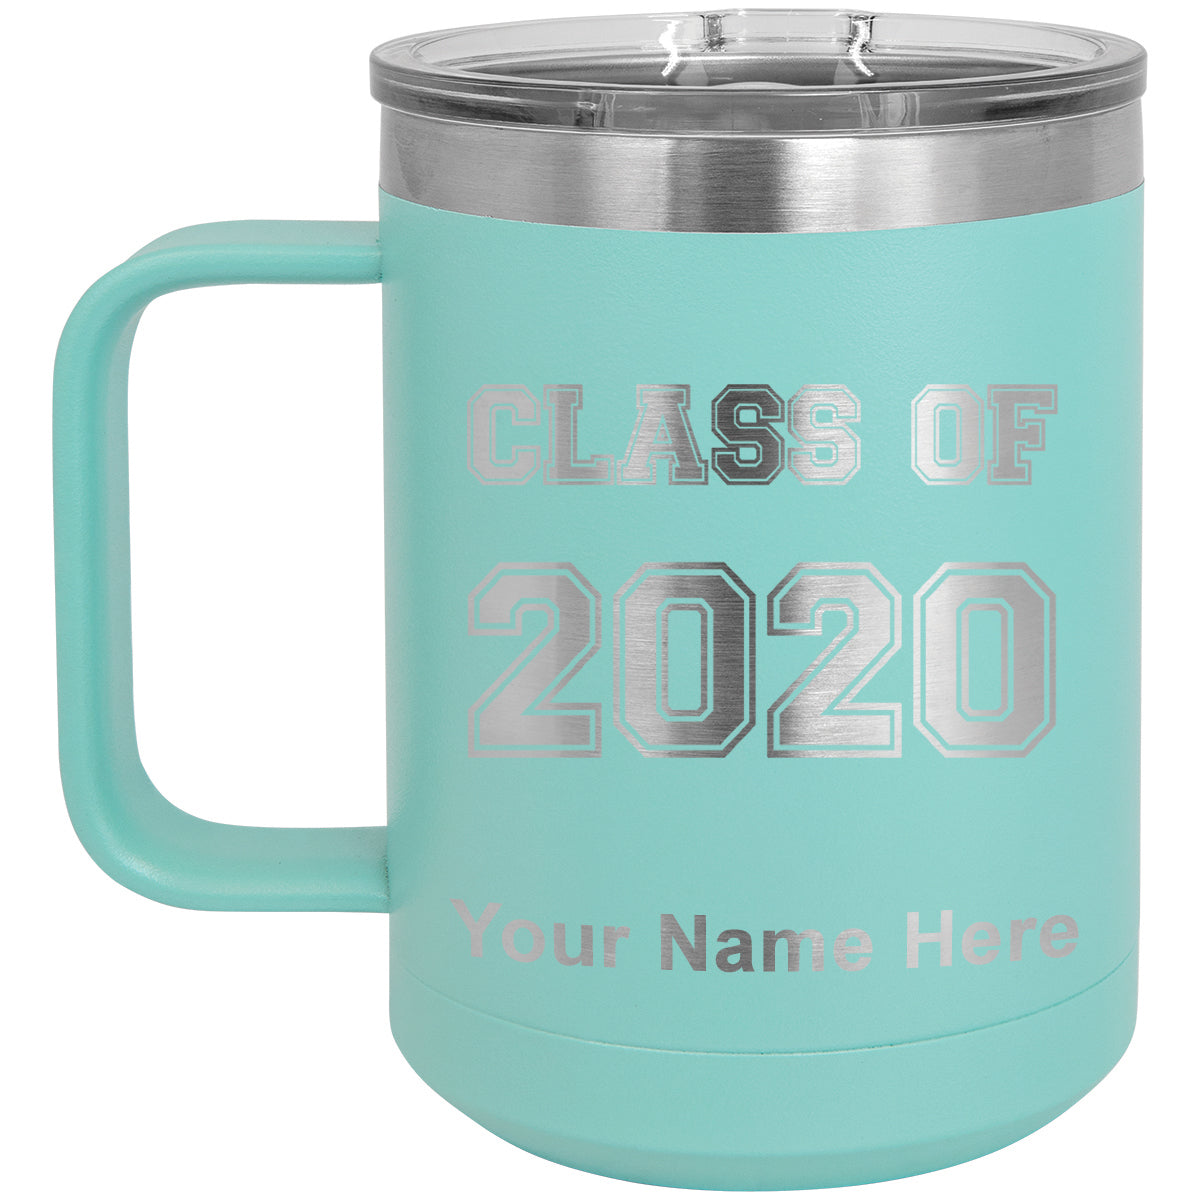 15oz Vacuum Insulated Coffee Mug, Class of 2020, 2021, 2022, 2023 2024, 2025, Personalized Engraving Included